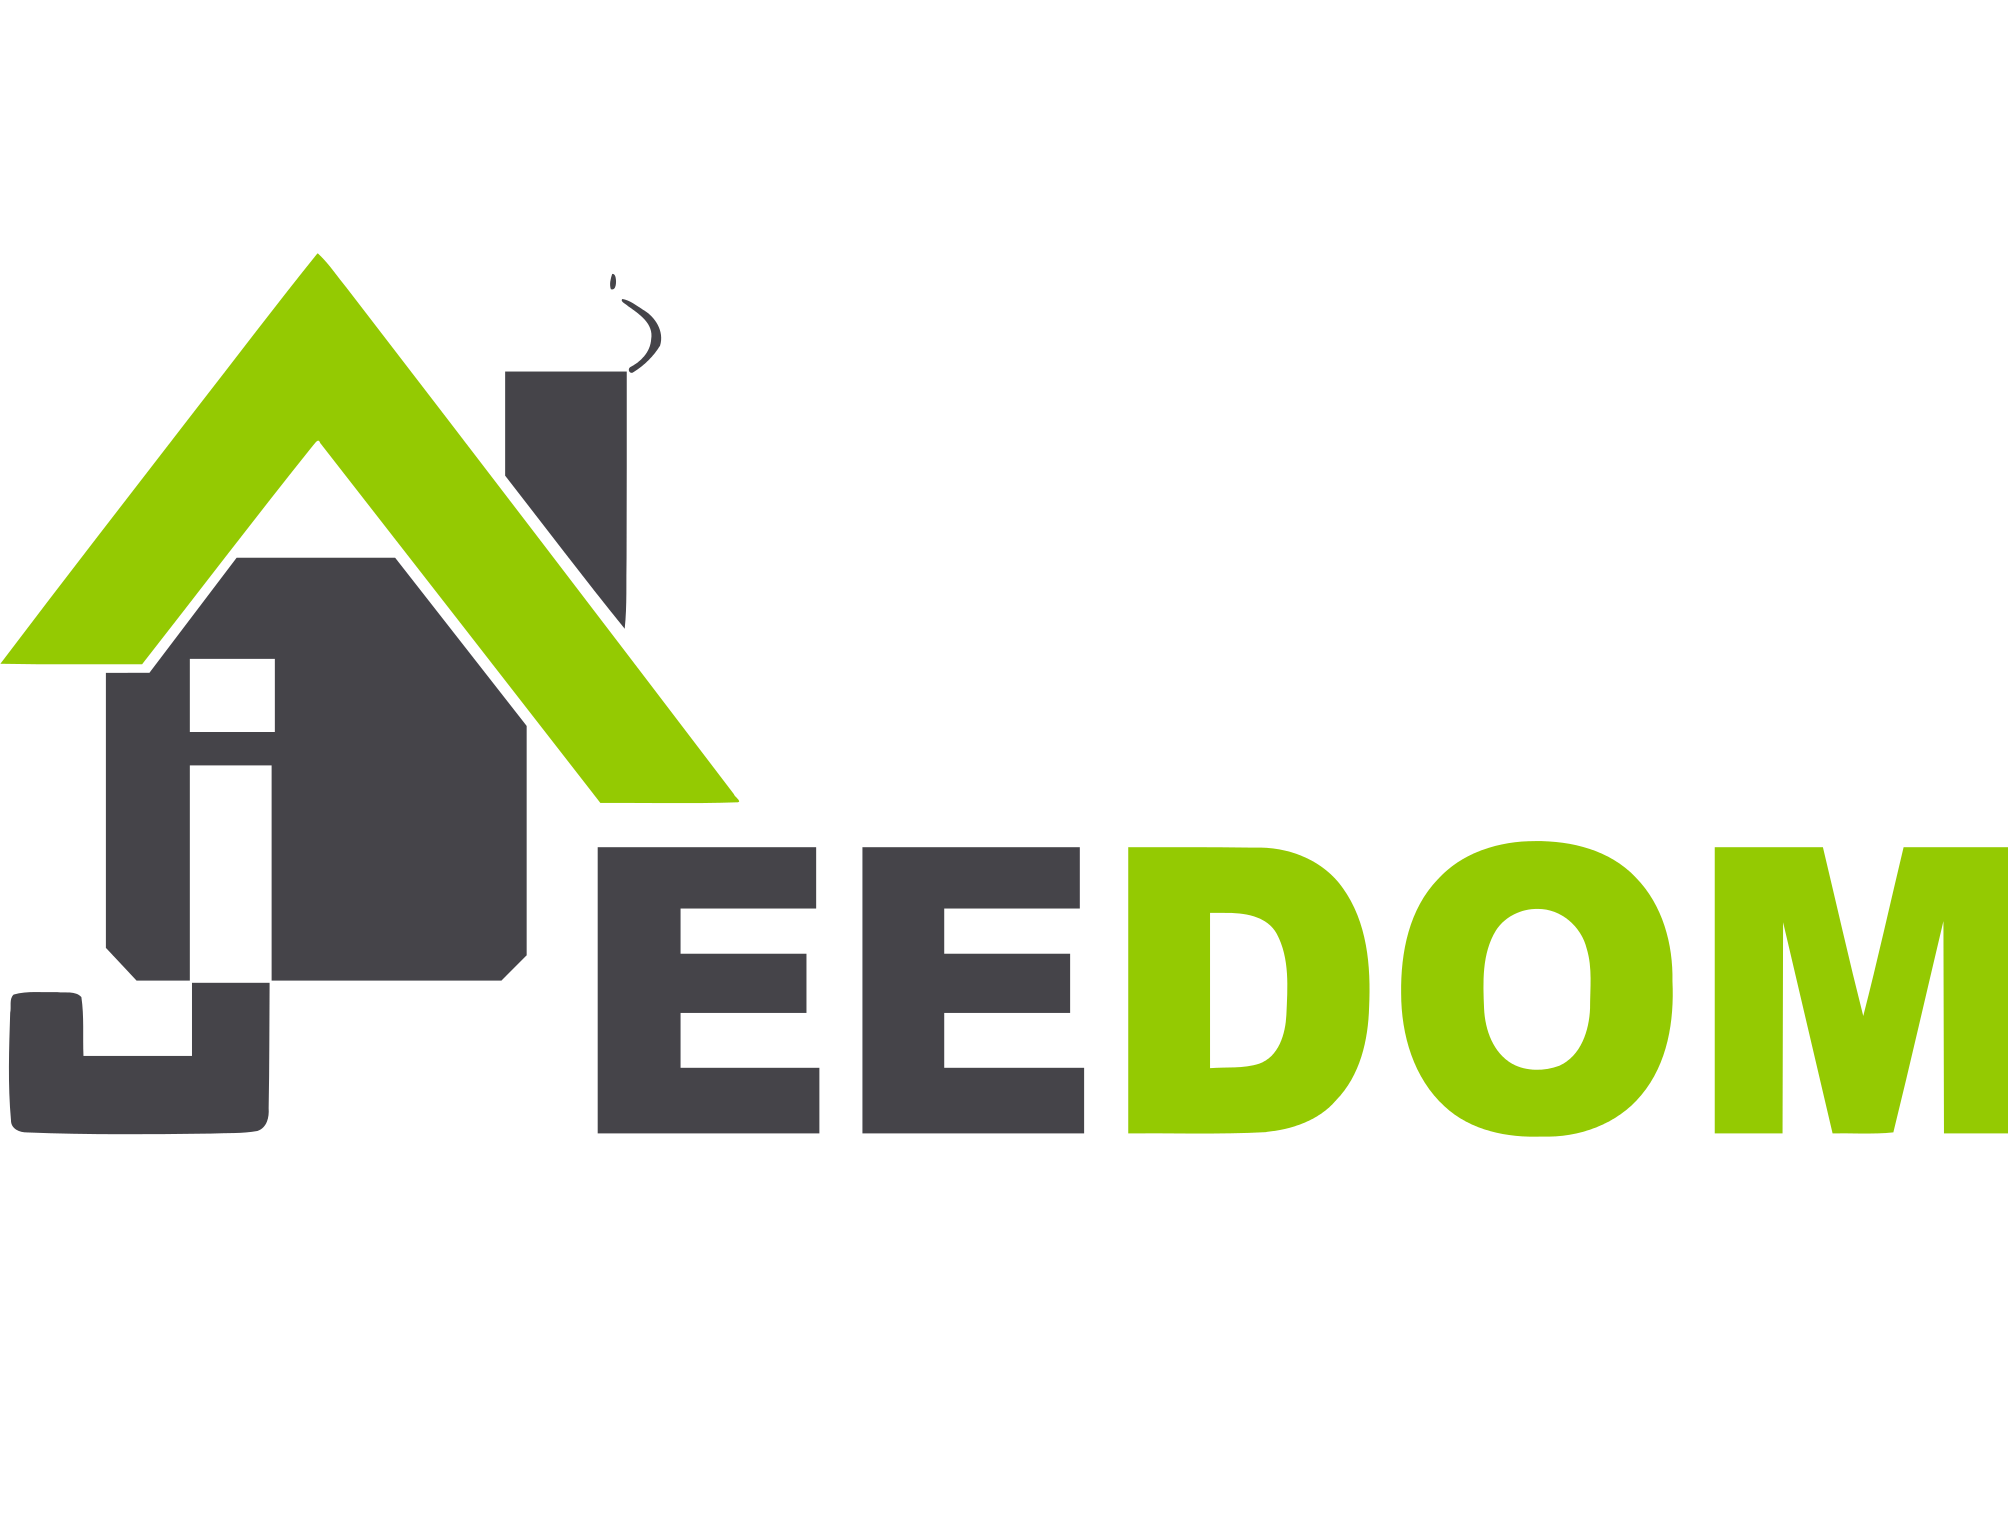 Jeedom-Logo.png